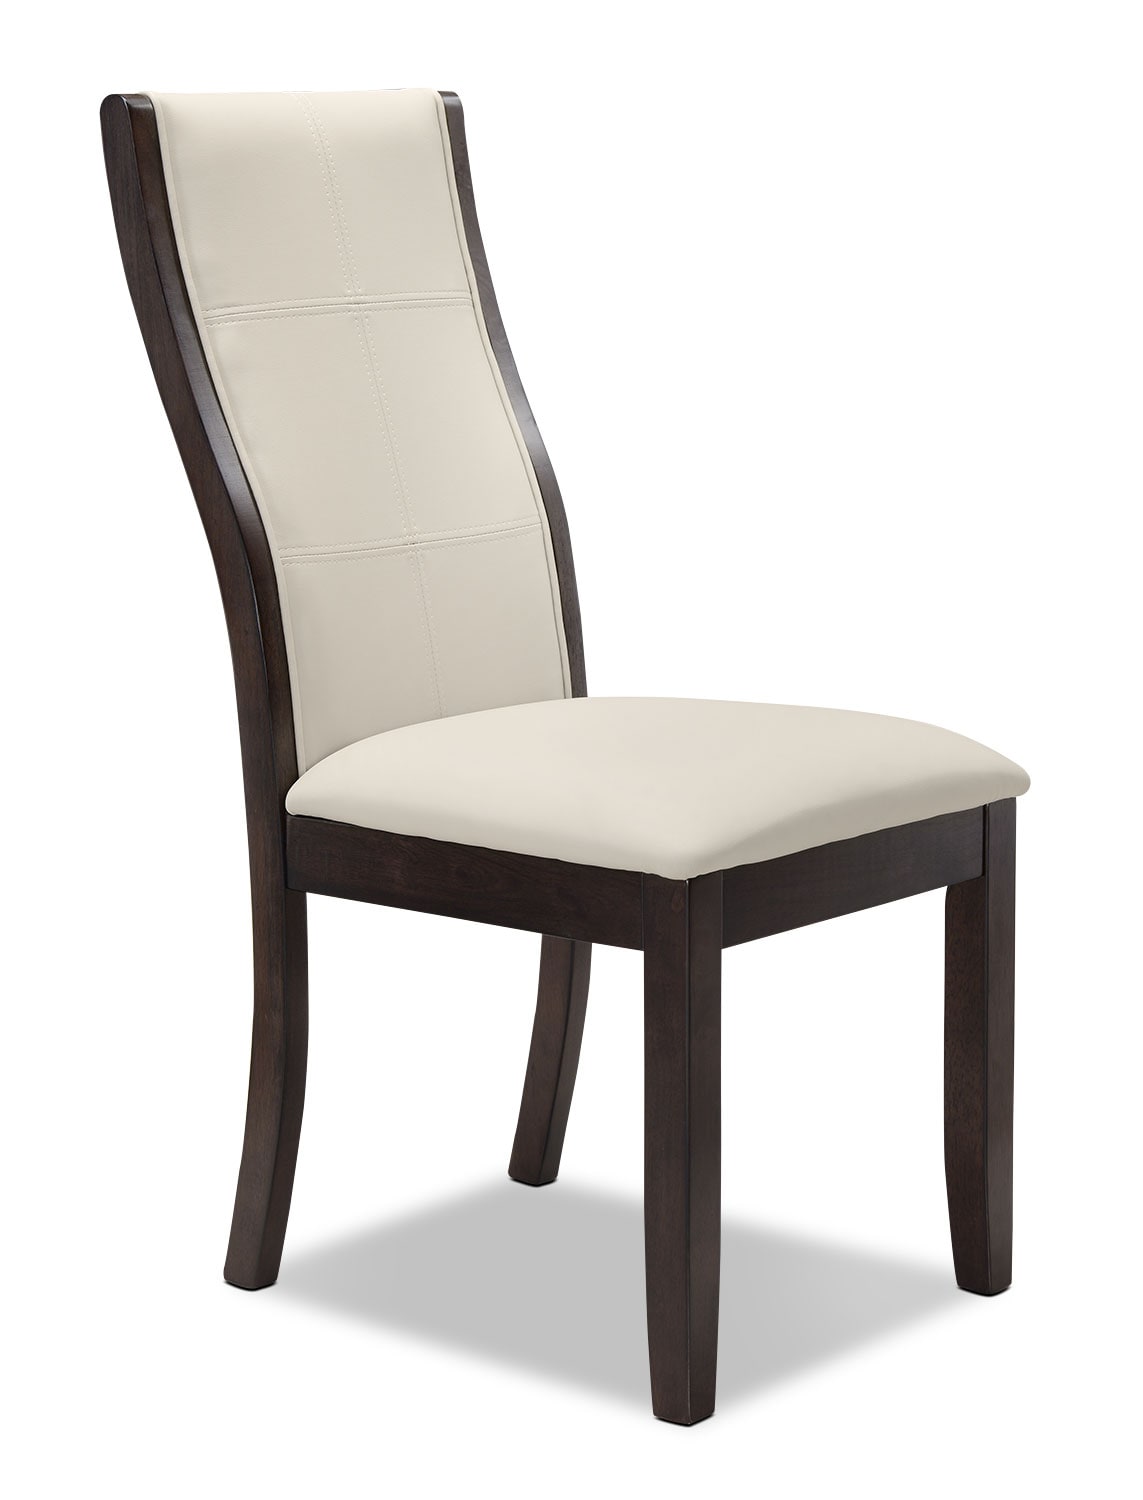 Taupe Dining Room Chairs - Cortesi Home Set of 2 Manchester Dining